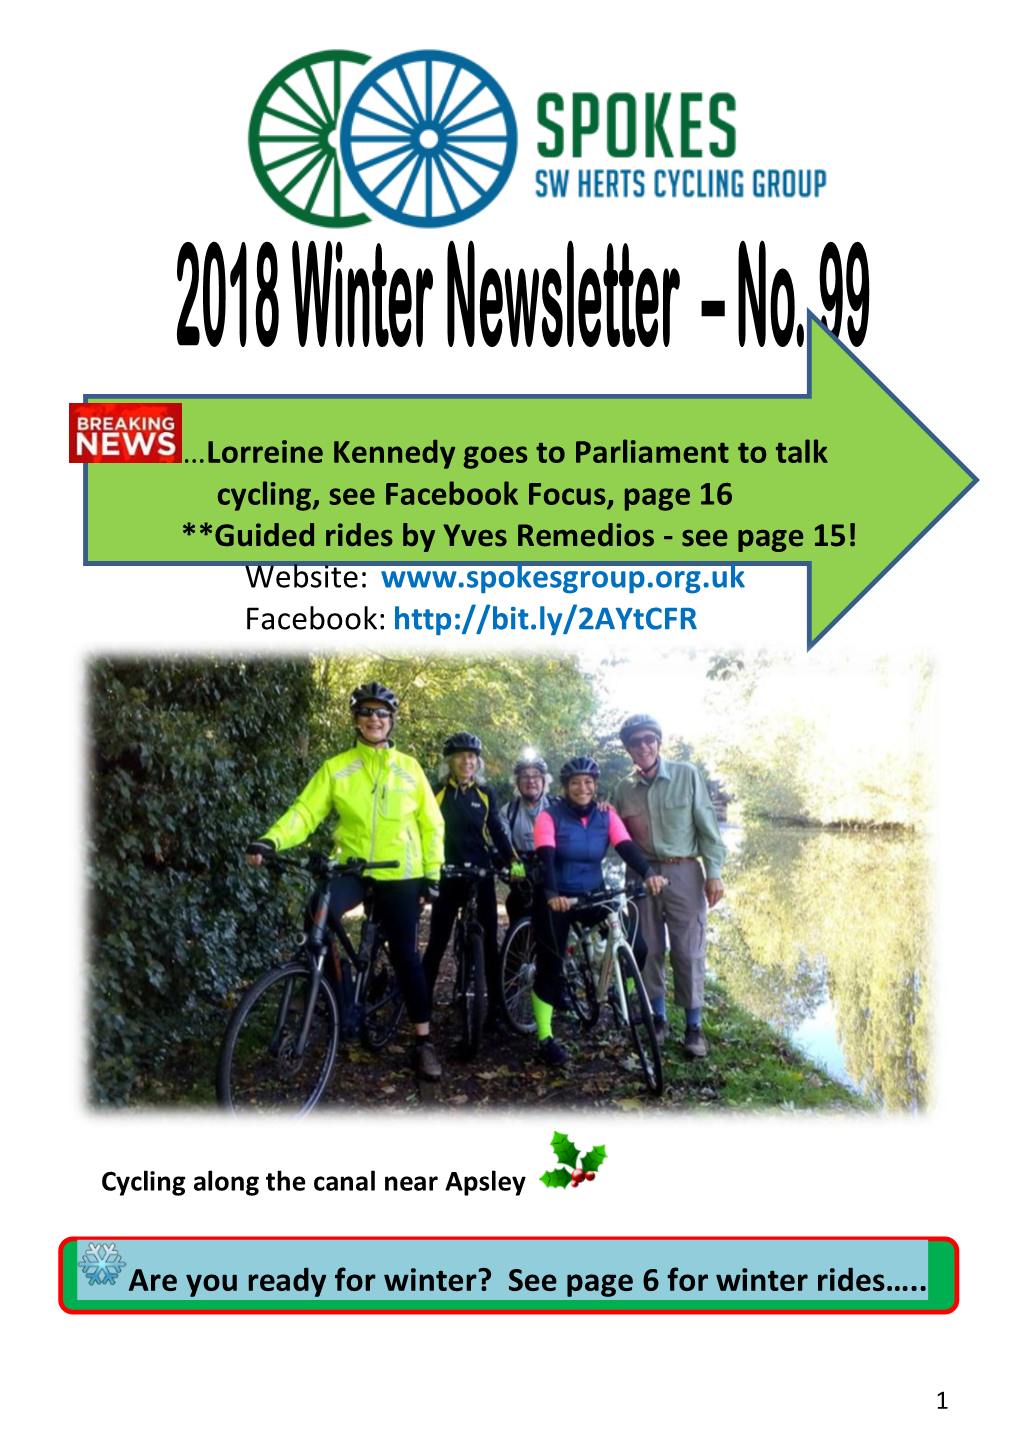 Lorreine Kennedy Goes to Parliament to Talk Cycling, See Facebook Focus, Page 16 **Guided Rides by Yves Remedios